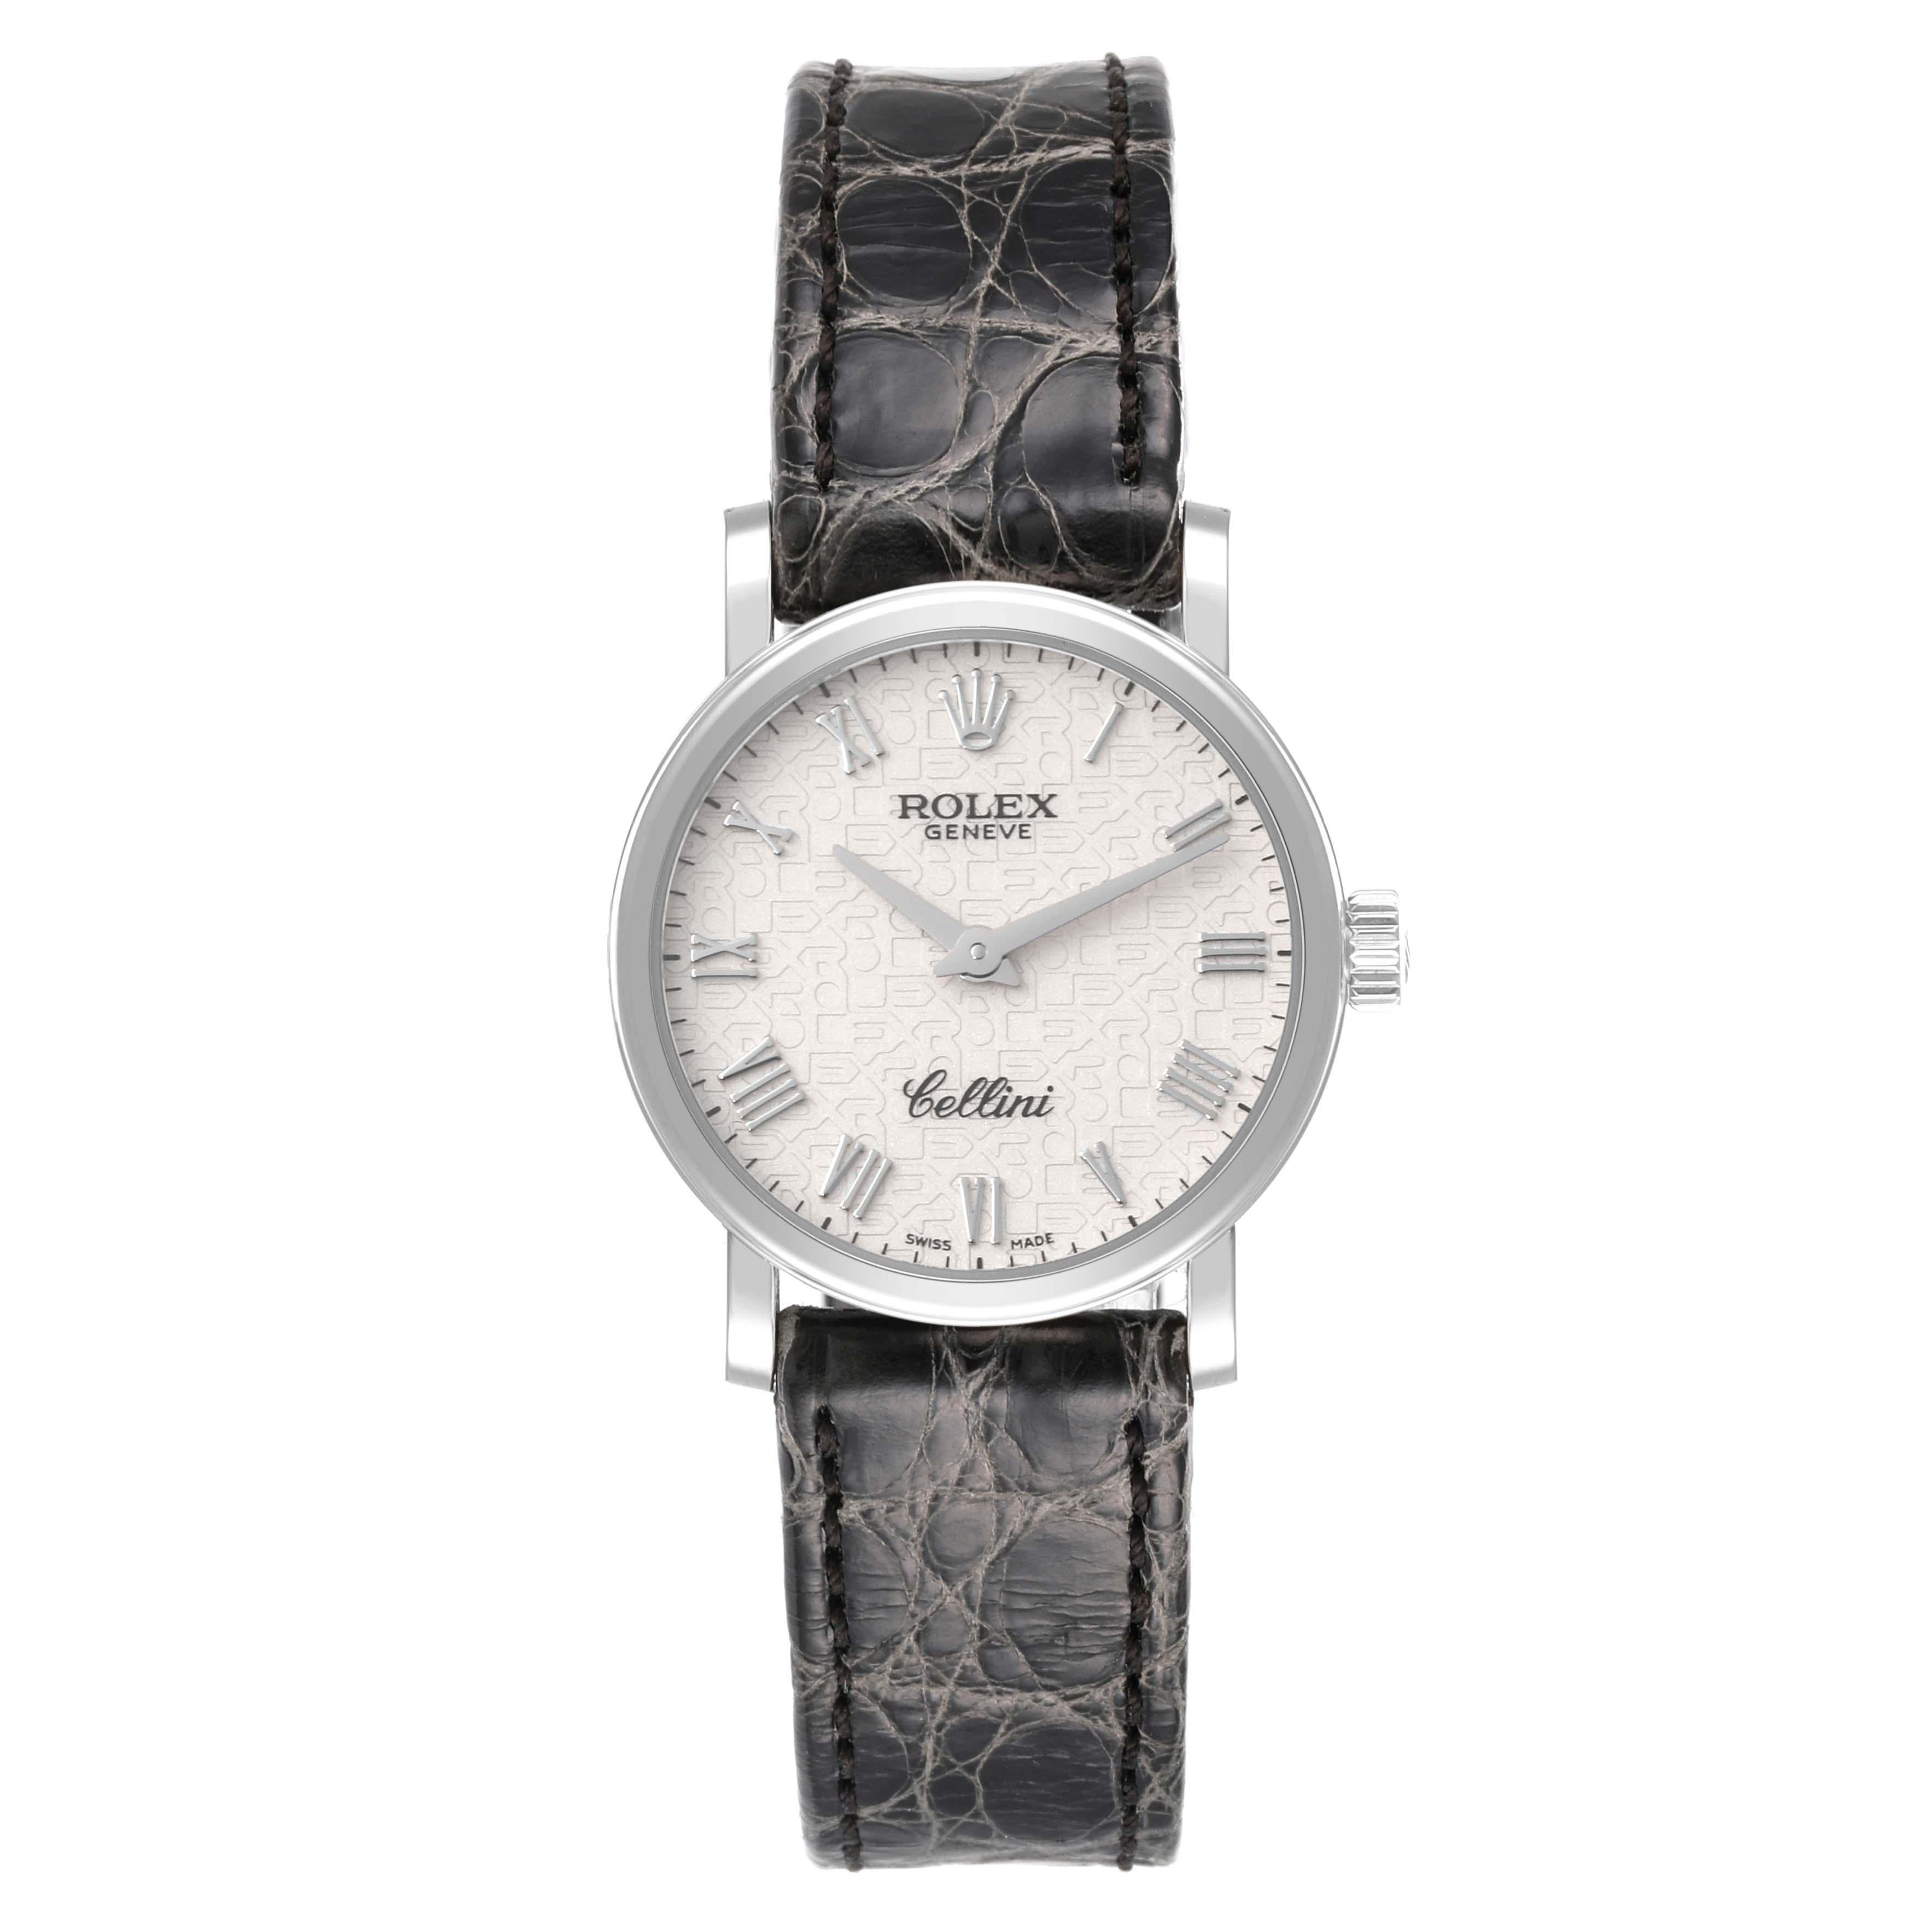 Rolex Cellini Classic White Gold Anniversary Dial Ladies Watch 6110 Unworn. Quartz movement. 18k white gold slim case 26.0 mm in diameter. . Scratch resistant sapphire crystal. Flat profile. Ivory jubilee anniversary dial with raised Roman numeral